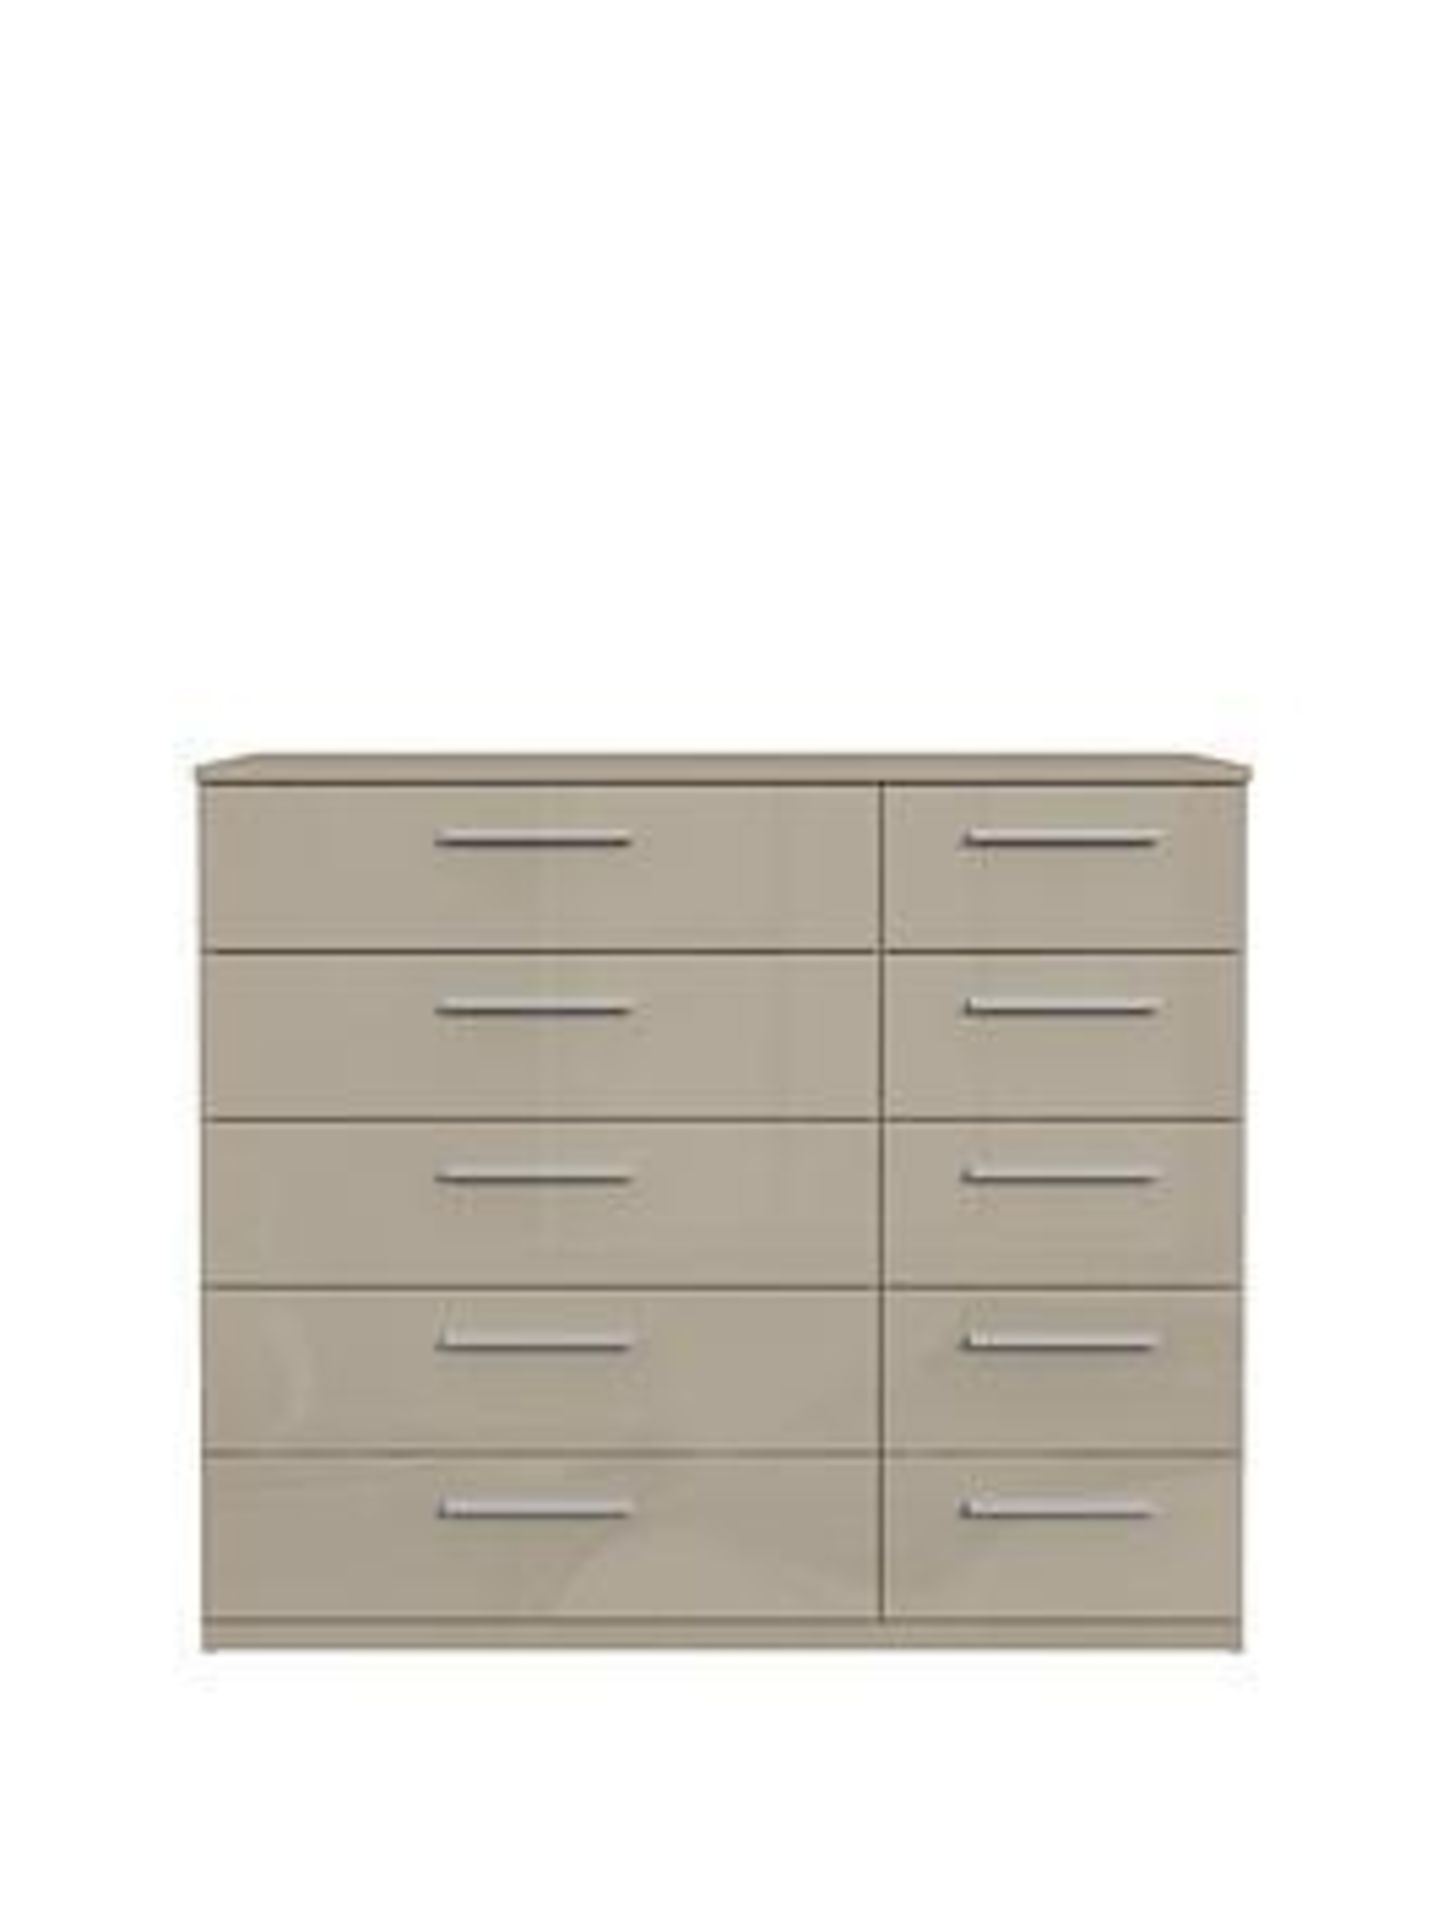 Boxed Item Westbury 10 Drawers Chest [Grey Gloss] 86X100X42Cm Rrp:£298.0 - Image 2 of 2